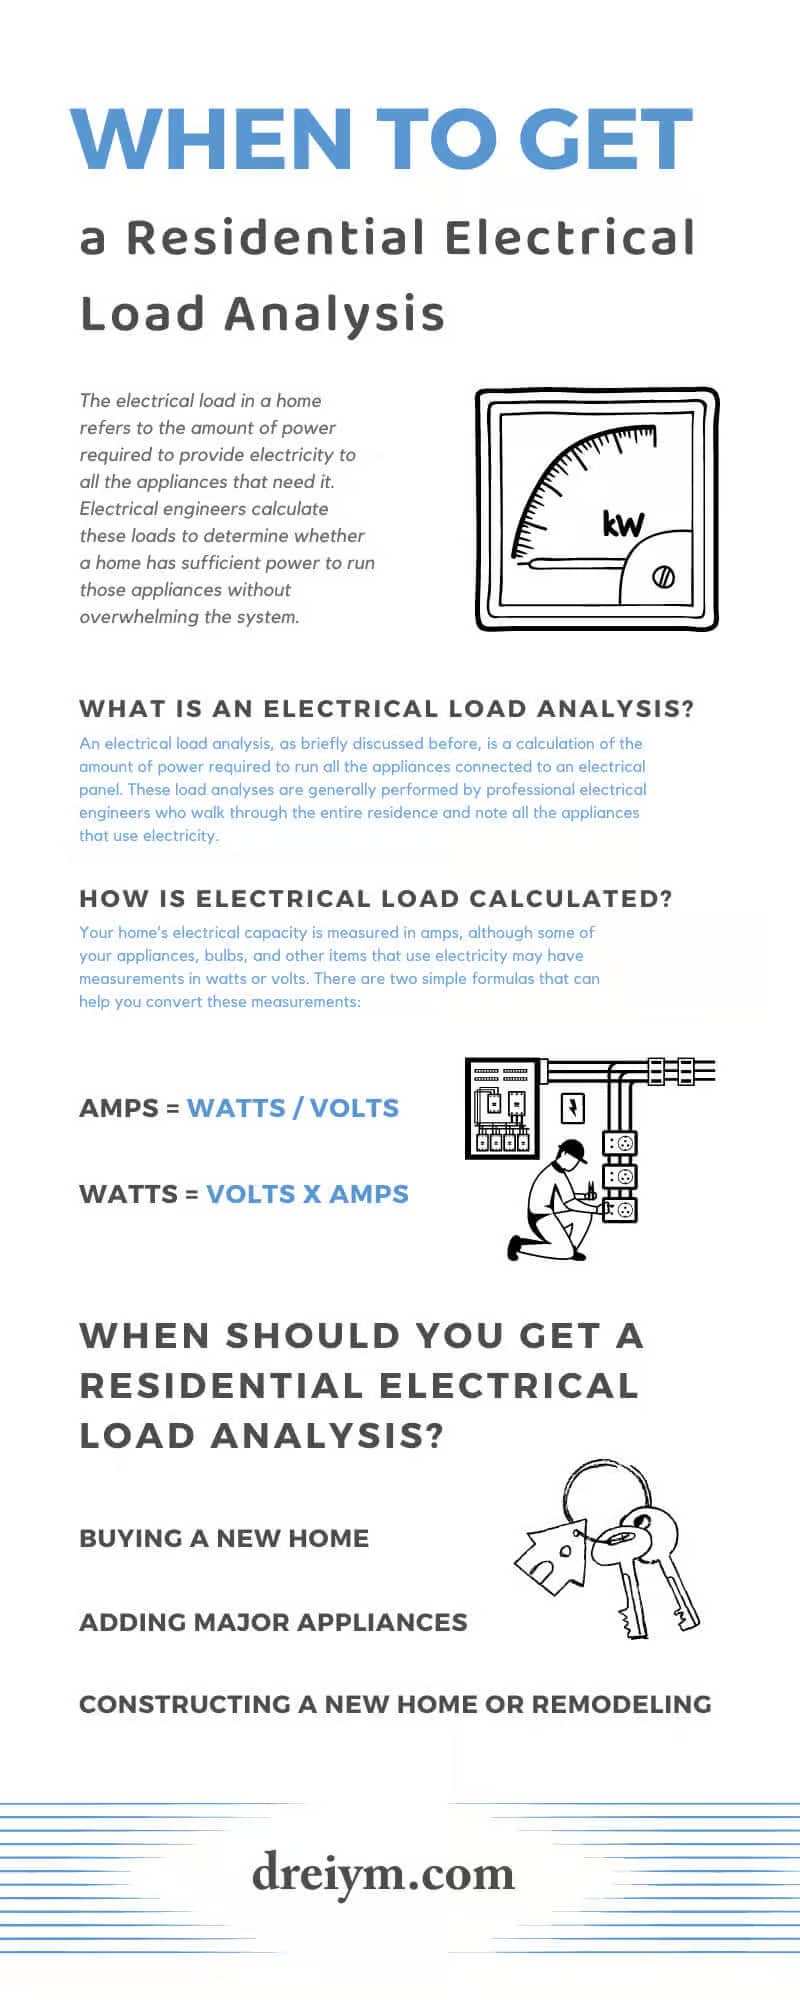 When To Get a Residential Electrical Load Analysis